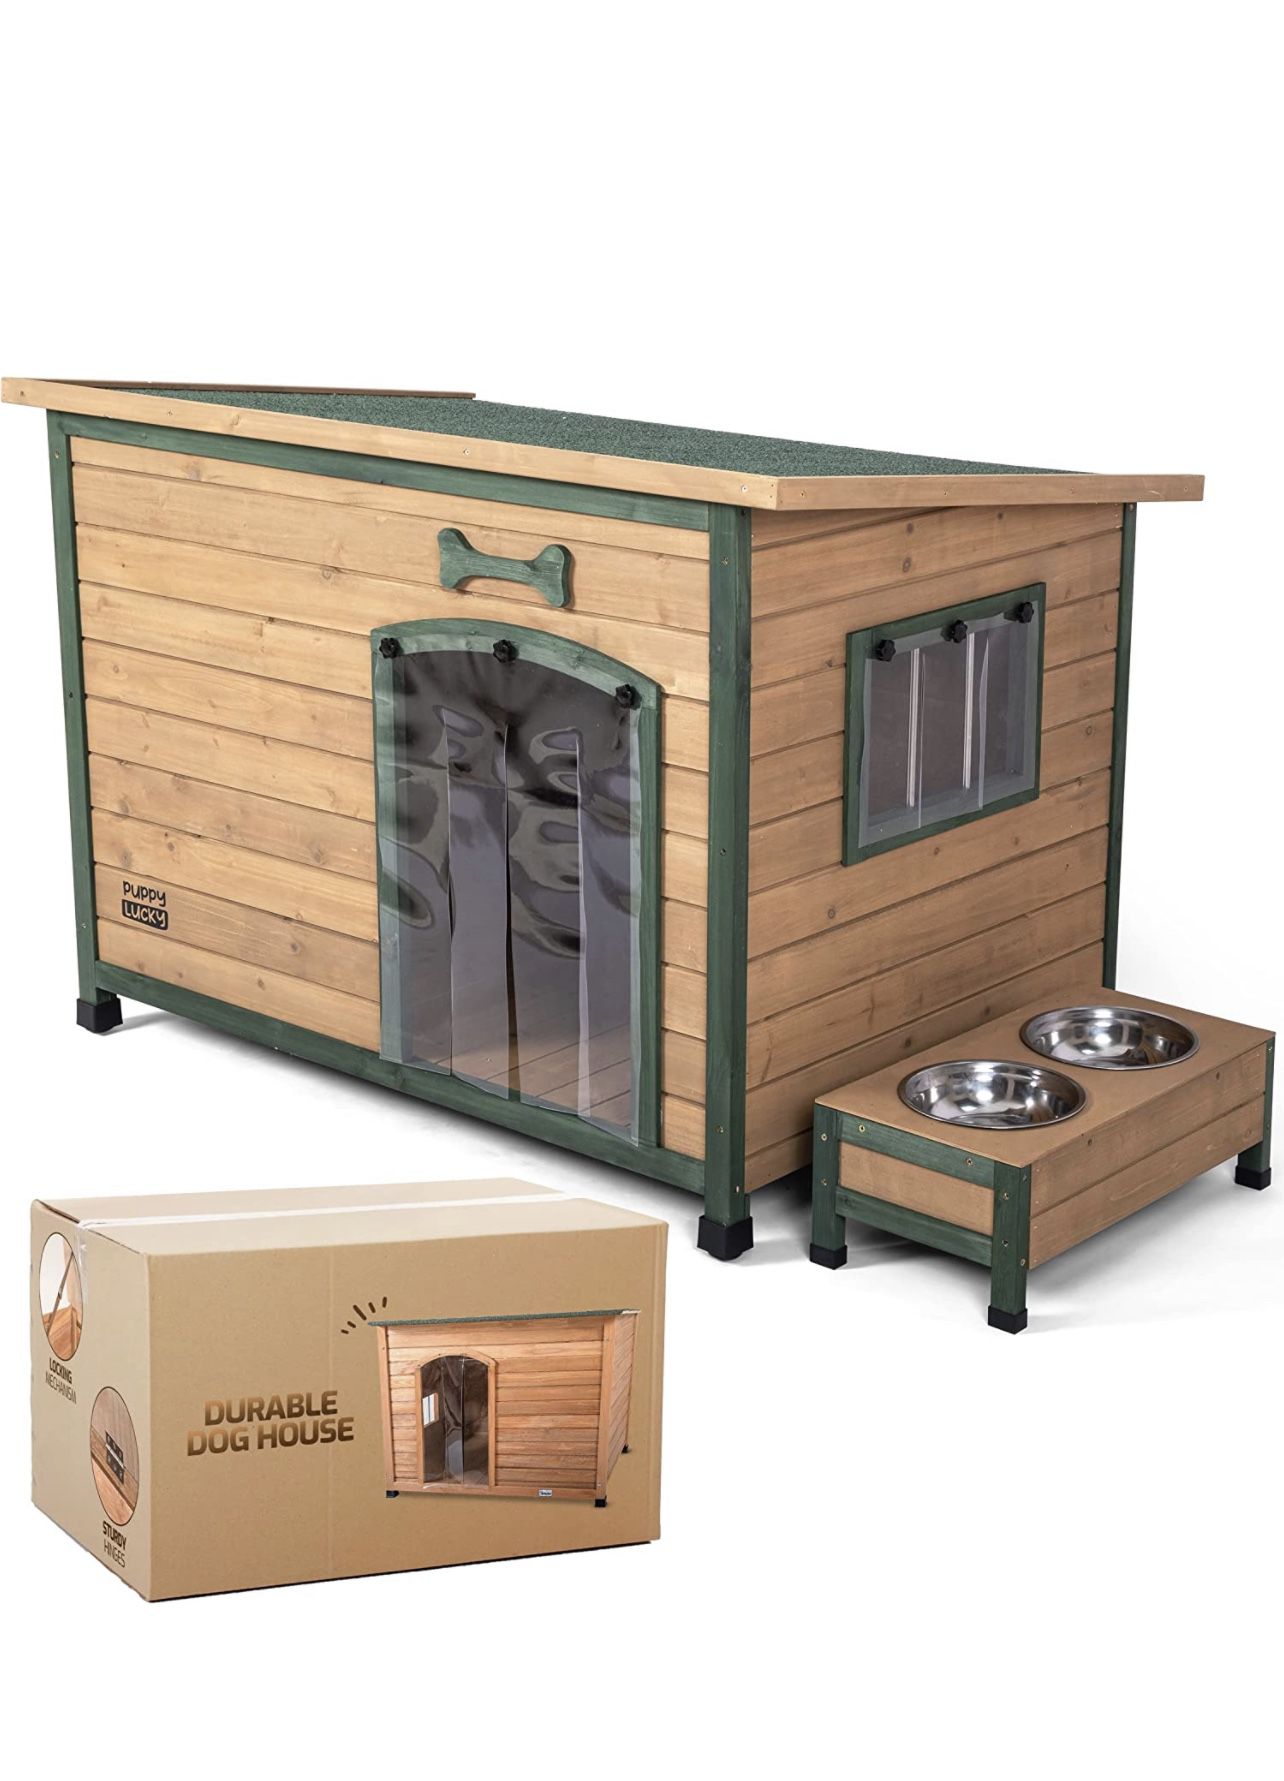 Wooden Dog House | Weatherproof Outdoor Dog House | Beautiful Green Roof with Food & Water Bowl Included